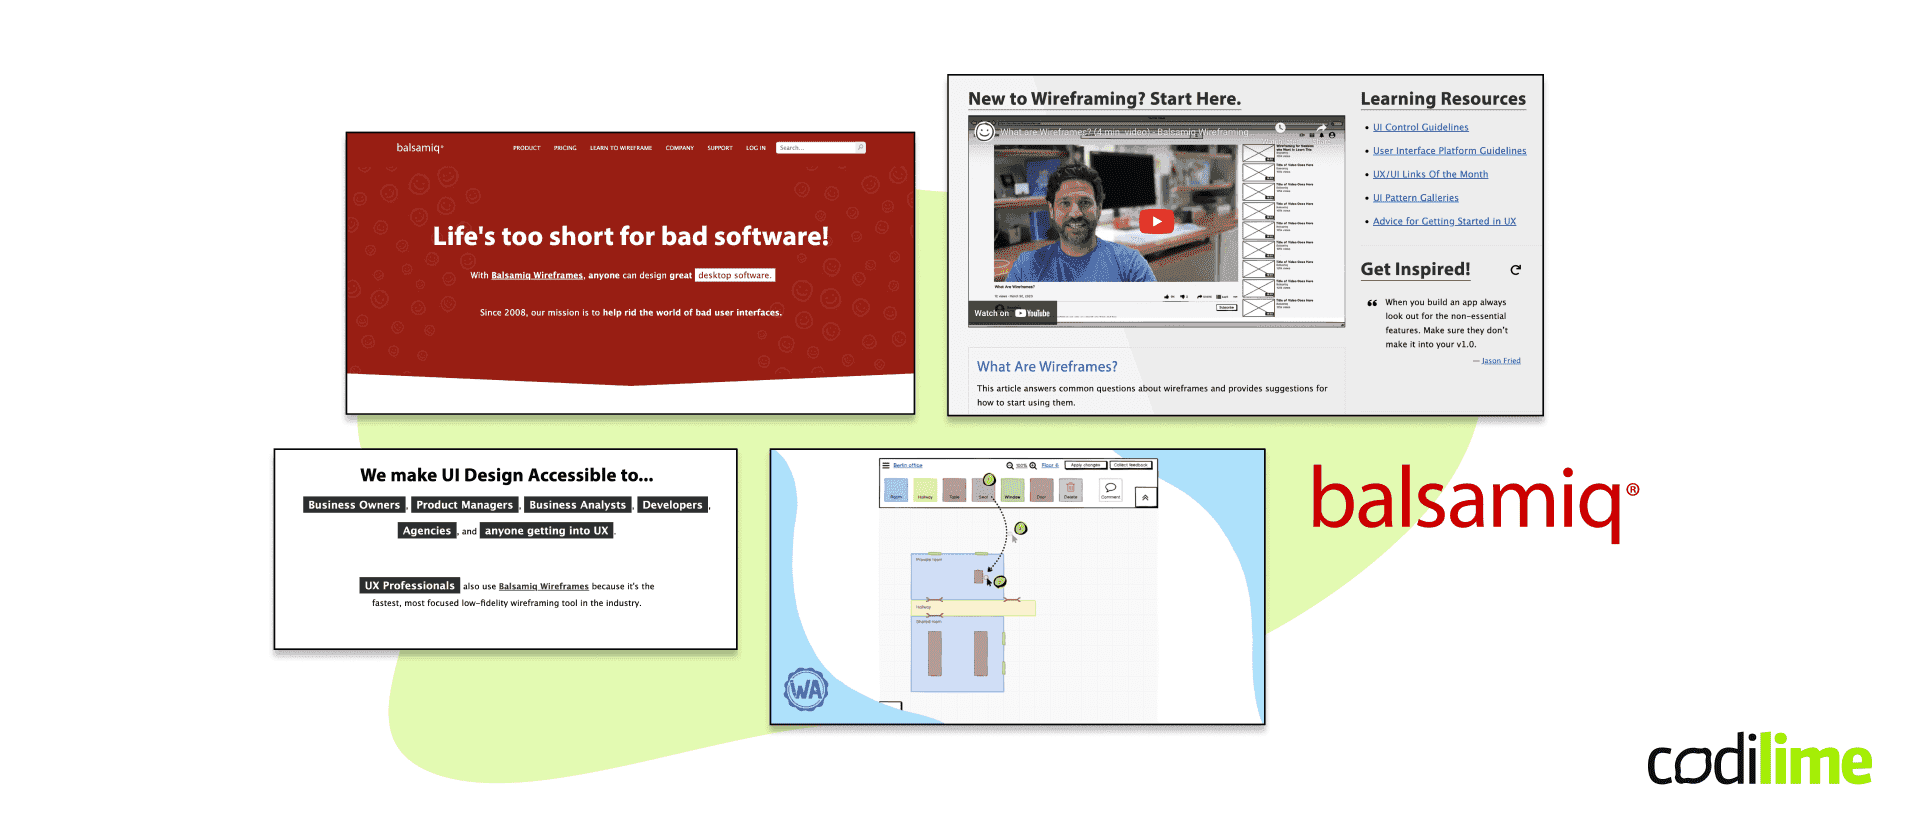  Tools for prototyping - Balsamiq